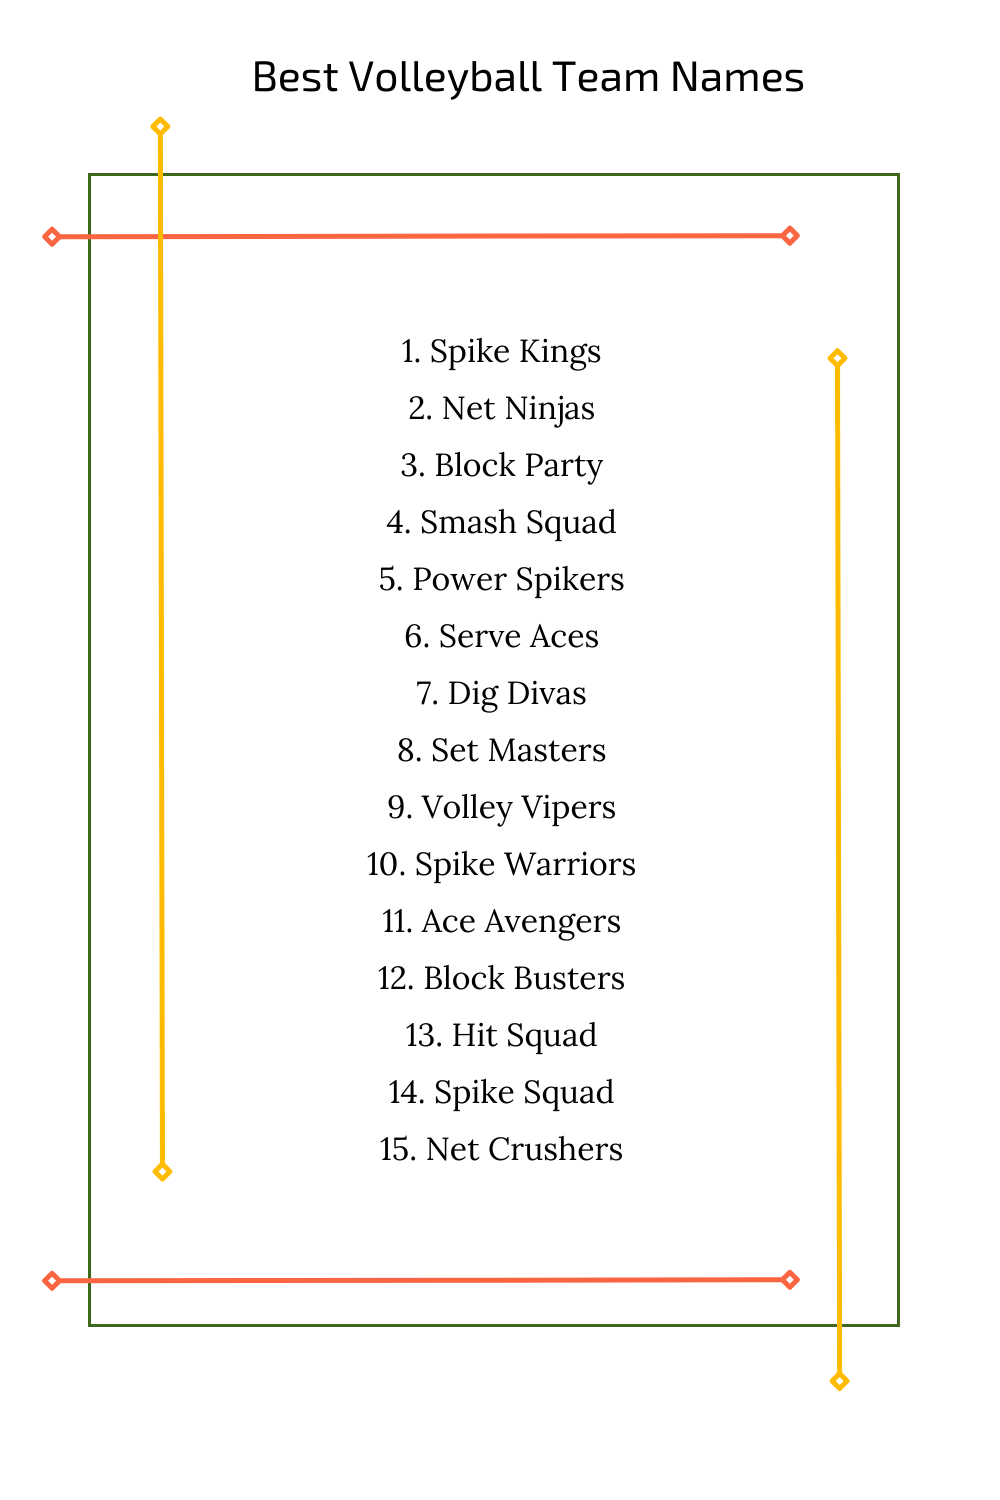 Best Volleyball Team Names